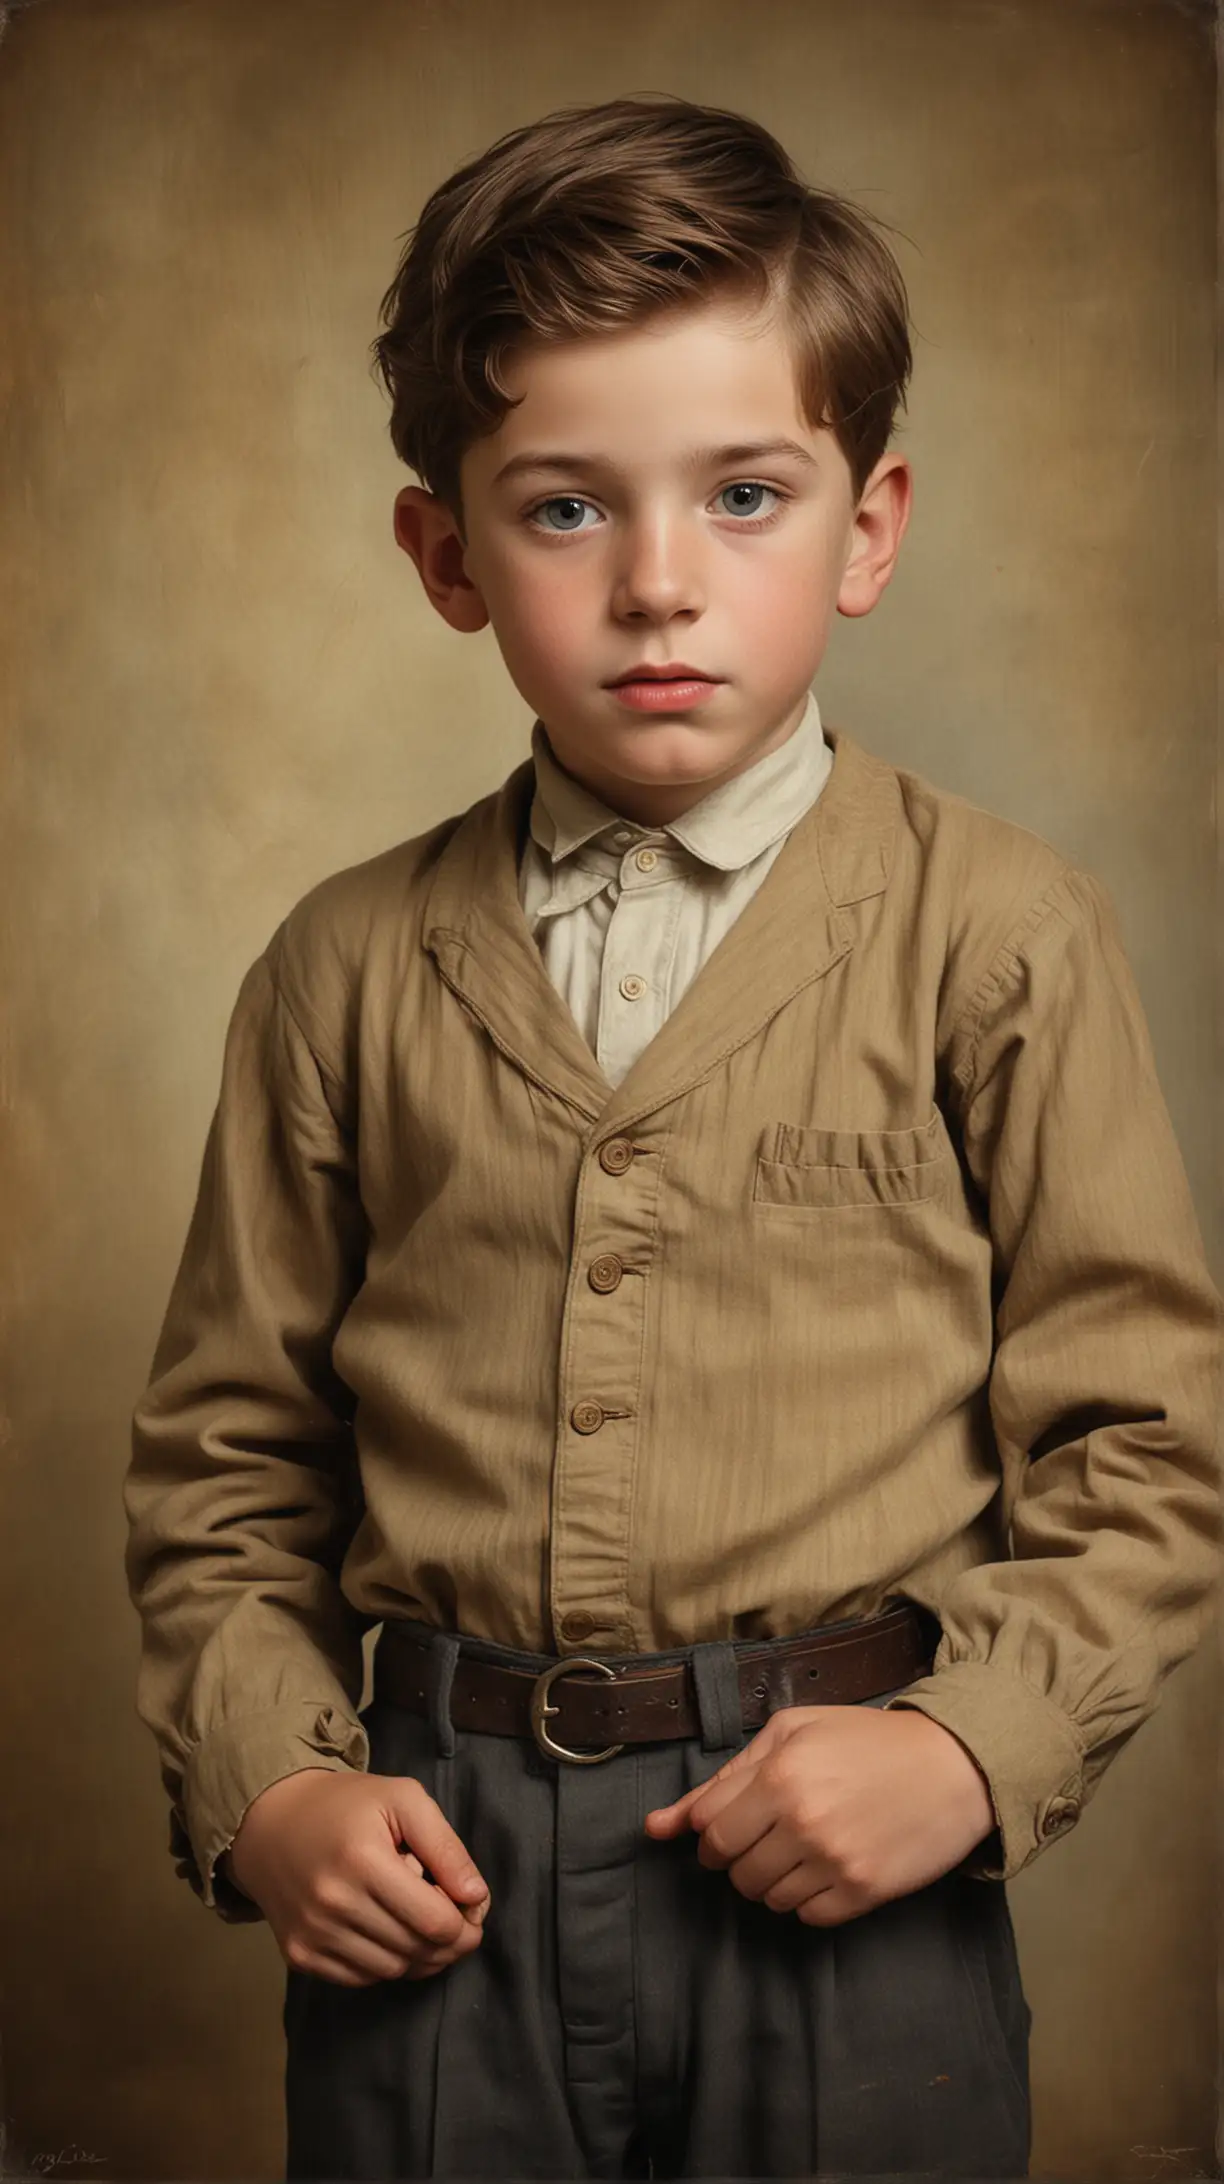 Childhood Portrait
Show a vintage-style portrait of a young James Francis Ryan, portraying innocence and youth.
Caption: "James Francis Ryan in his early years, a portrait of innocence before the horrors of war."